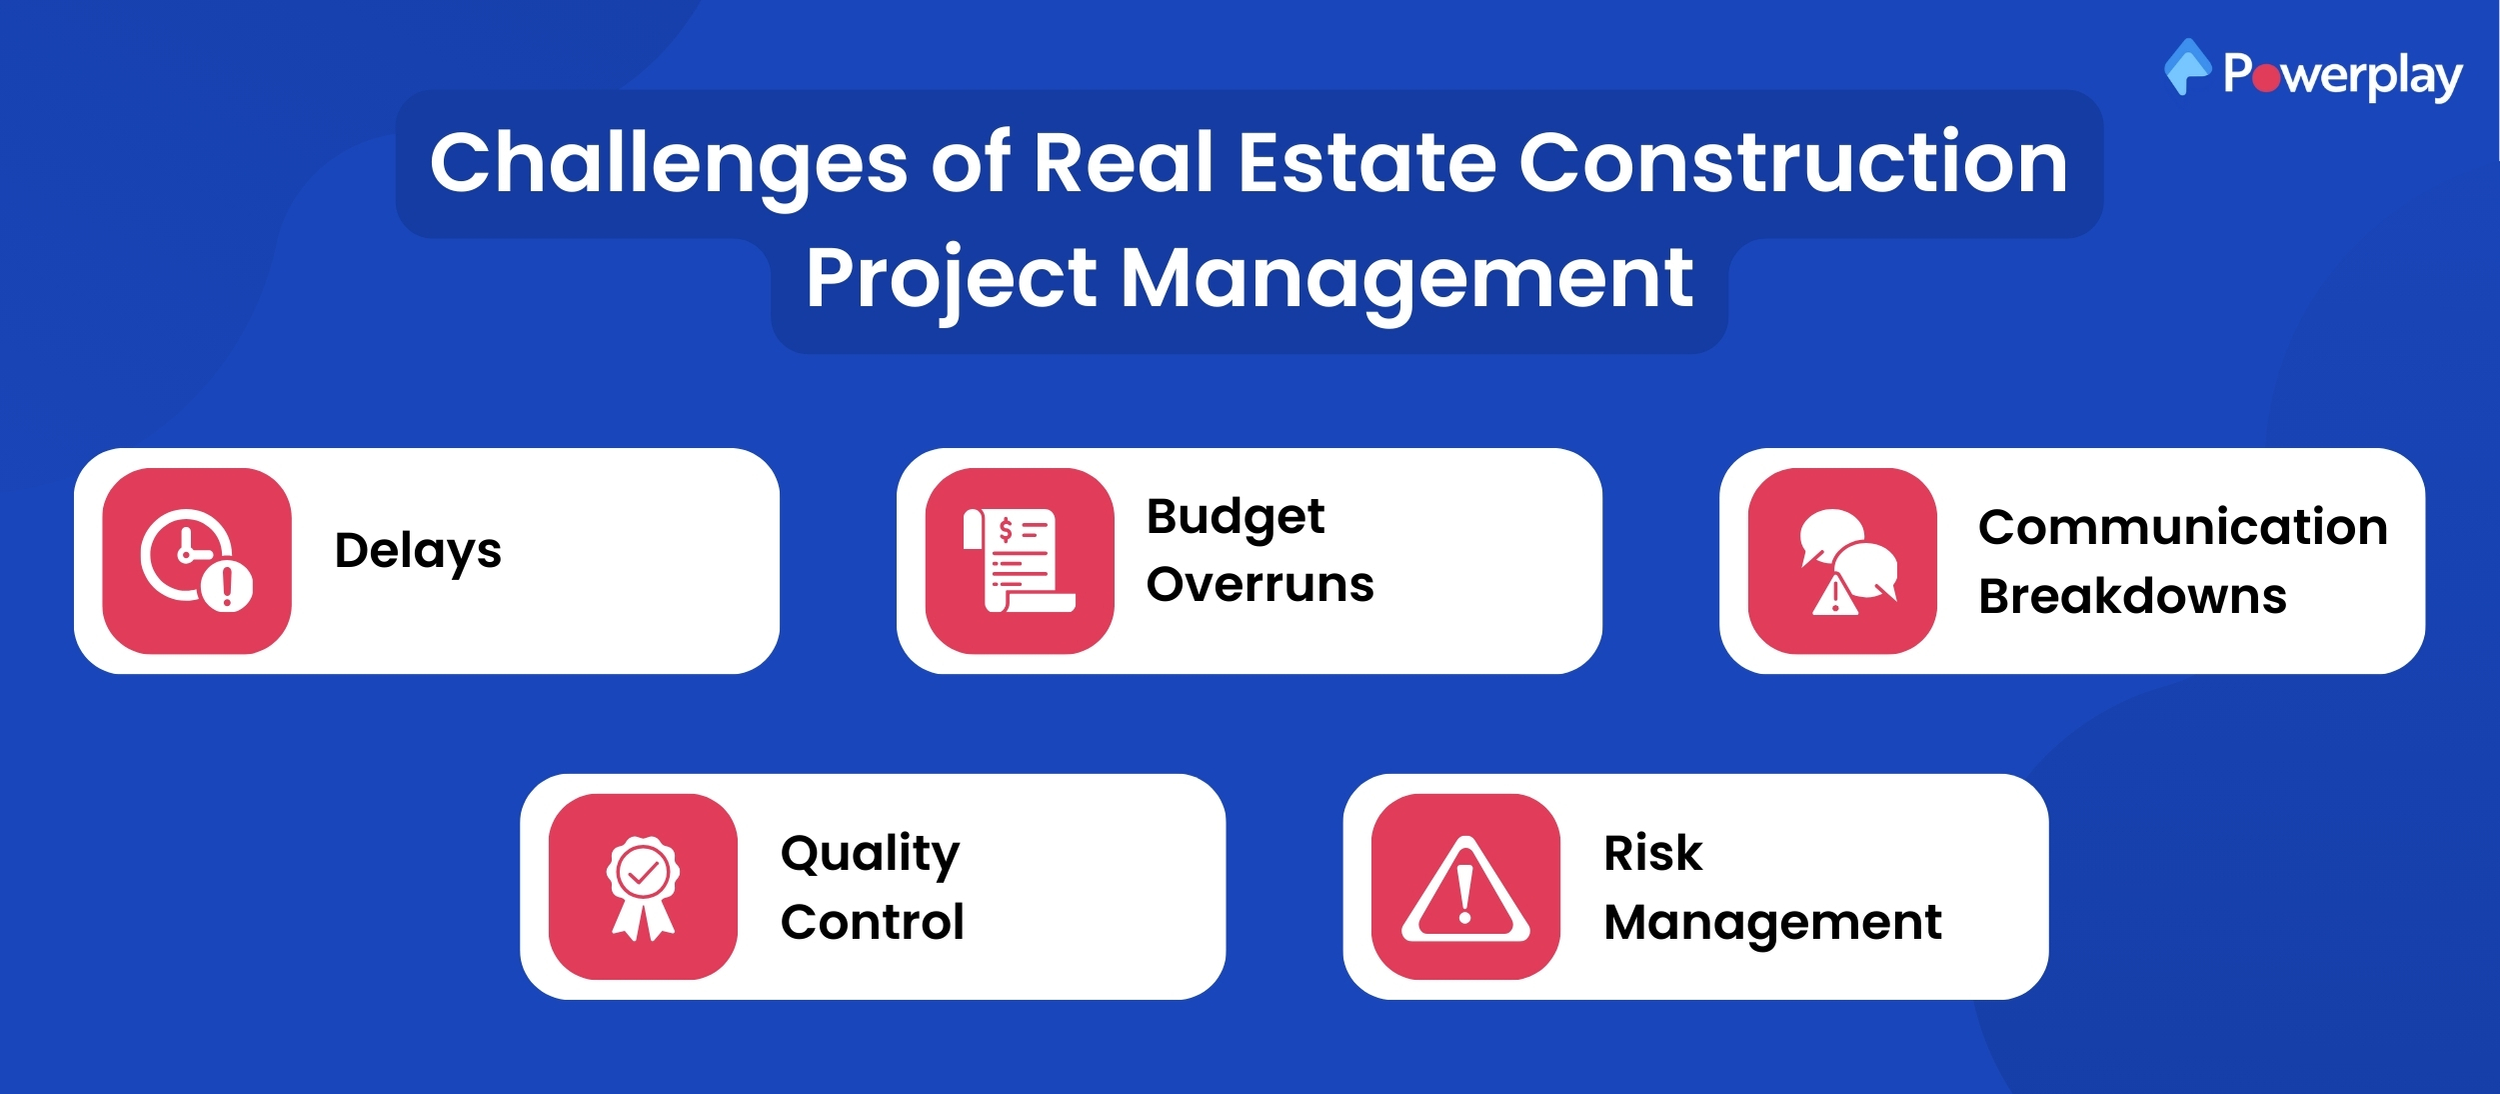 Challenges of Real Estate Construction Project Management